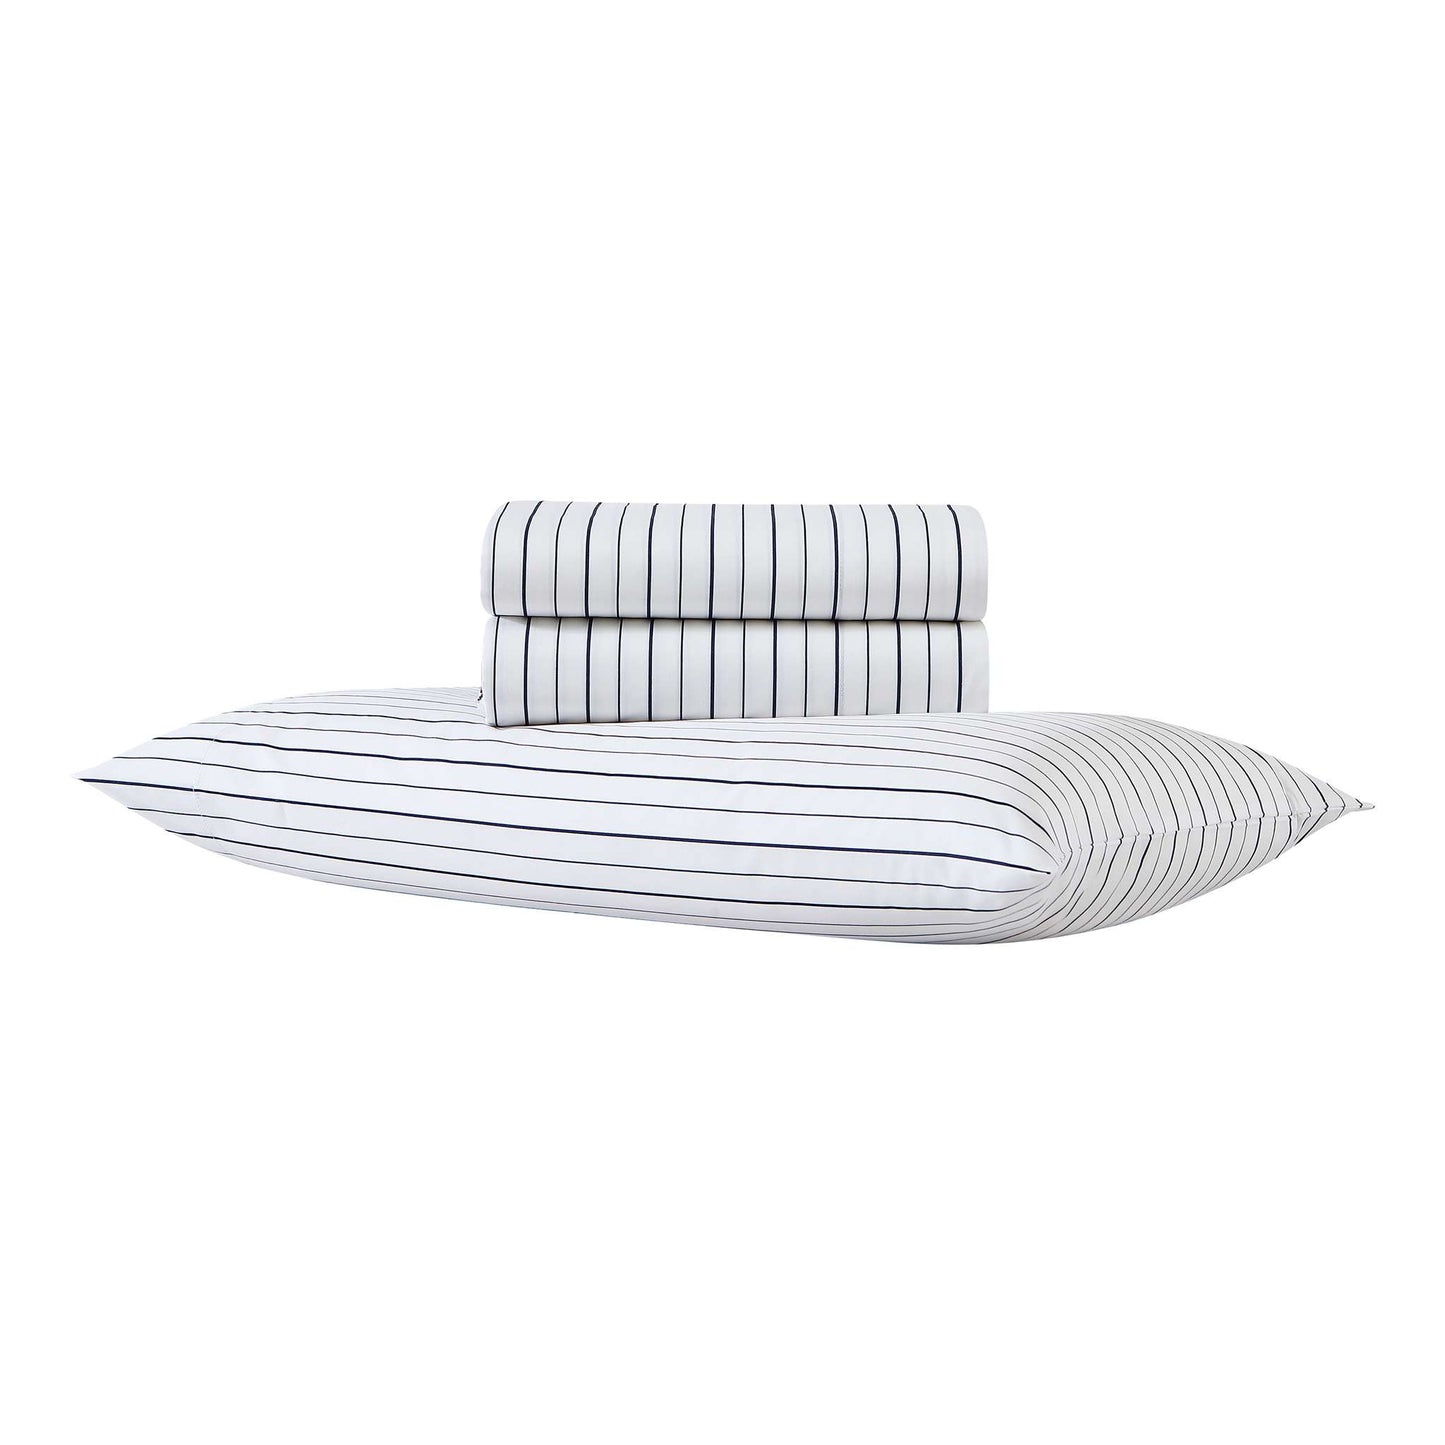 Freshee Striped Sheet Set Powered by Intellifresh Antimicrobial Technology